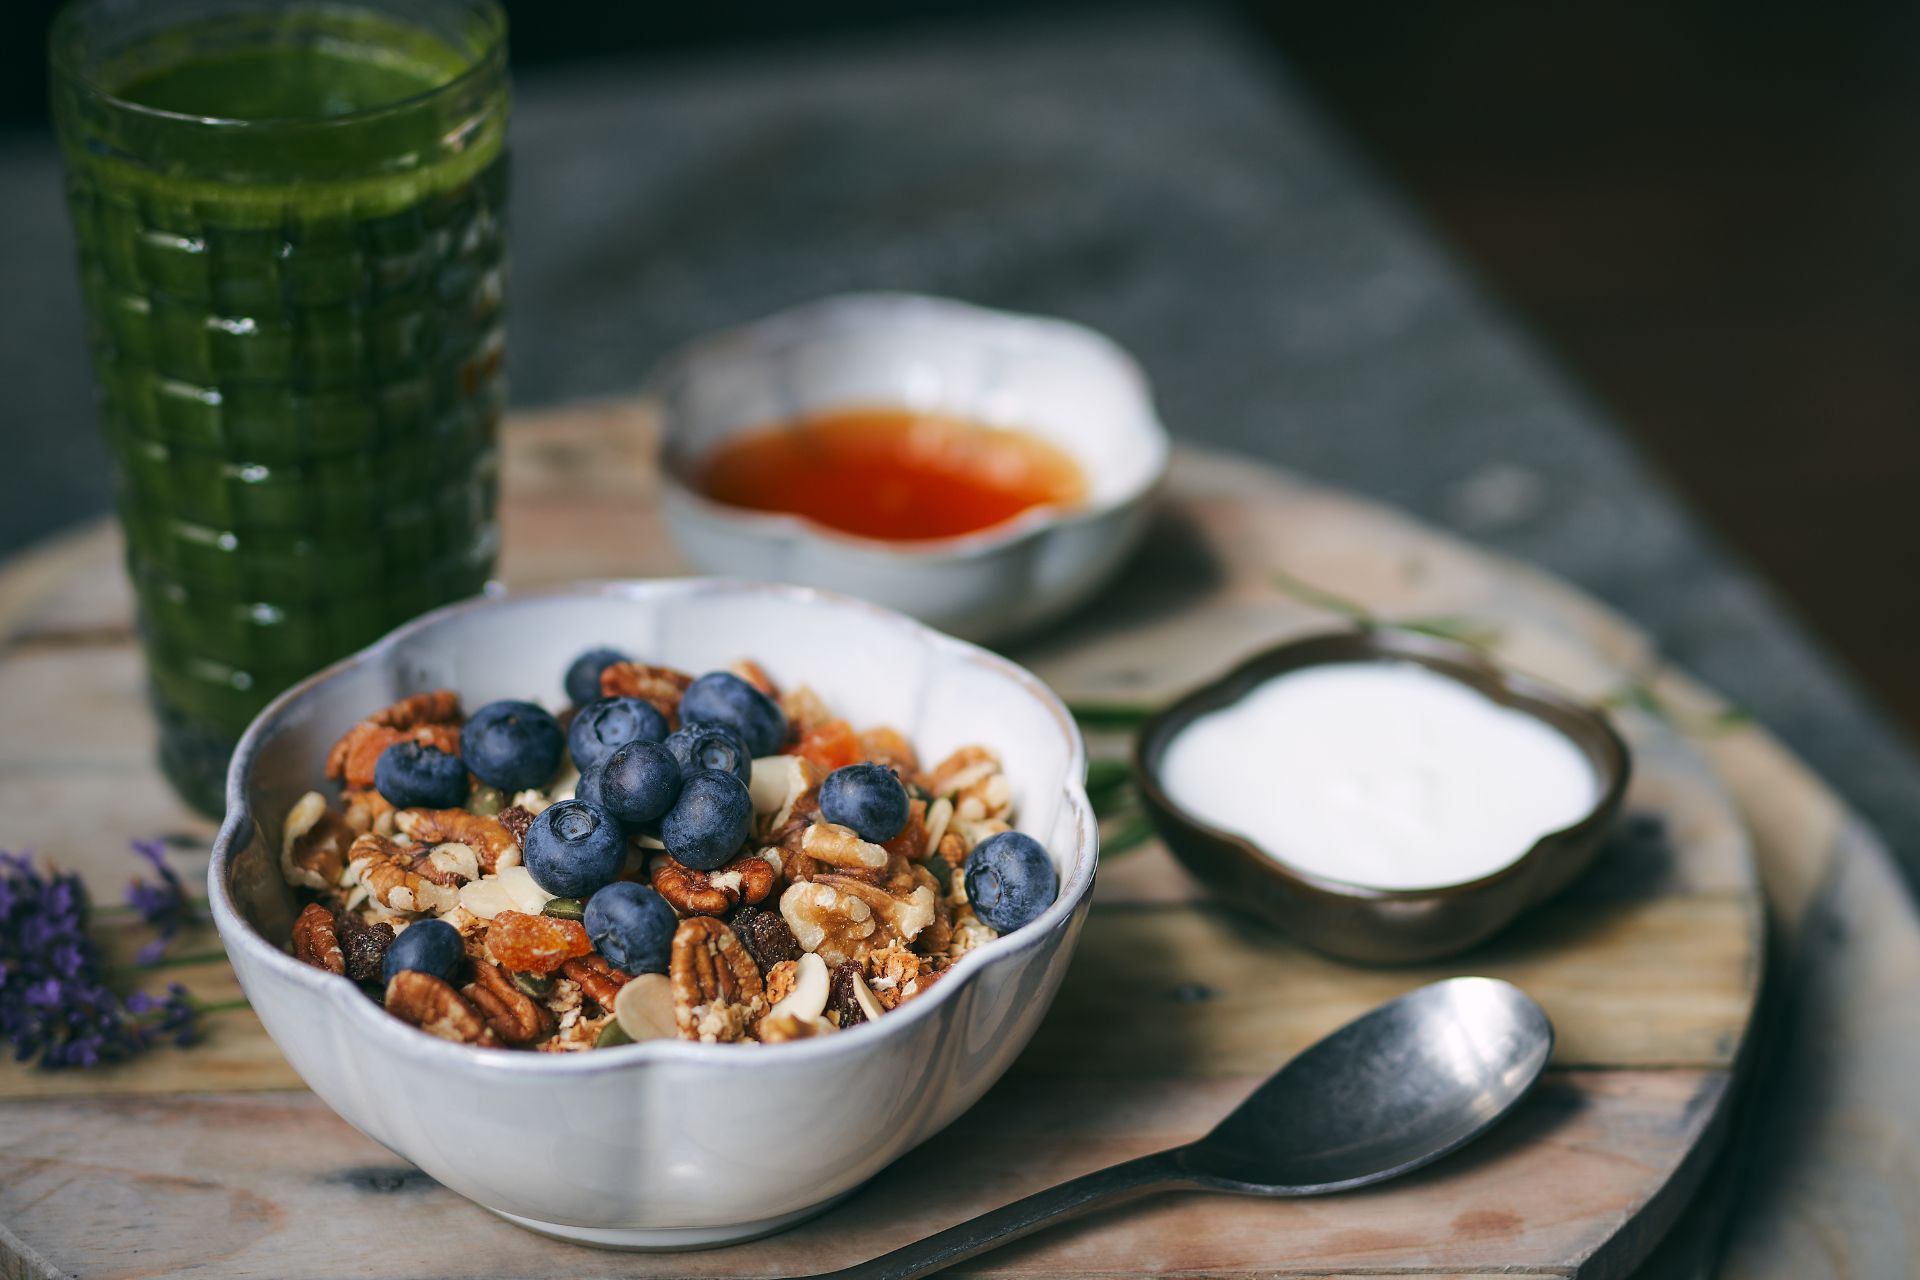 White ceramic bowl of granola and blueberries, with a glass of green juice beside it.